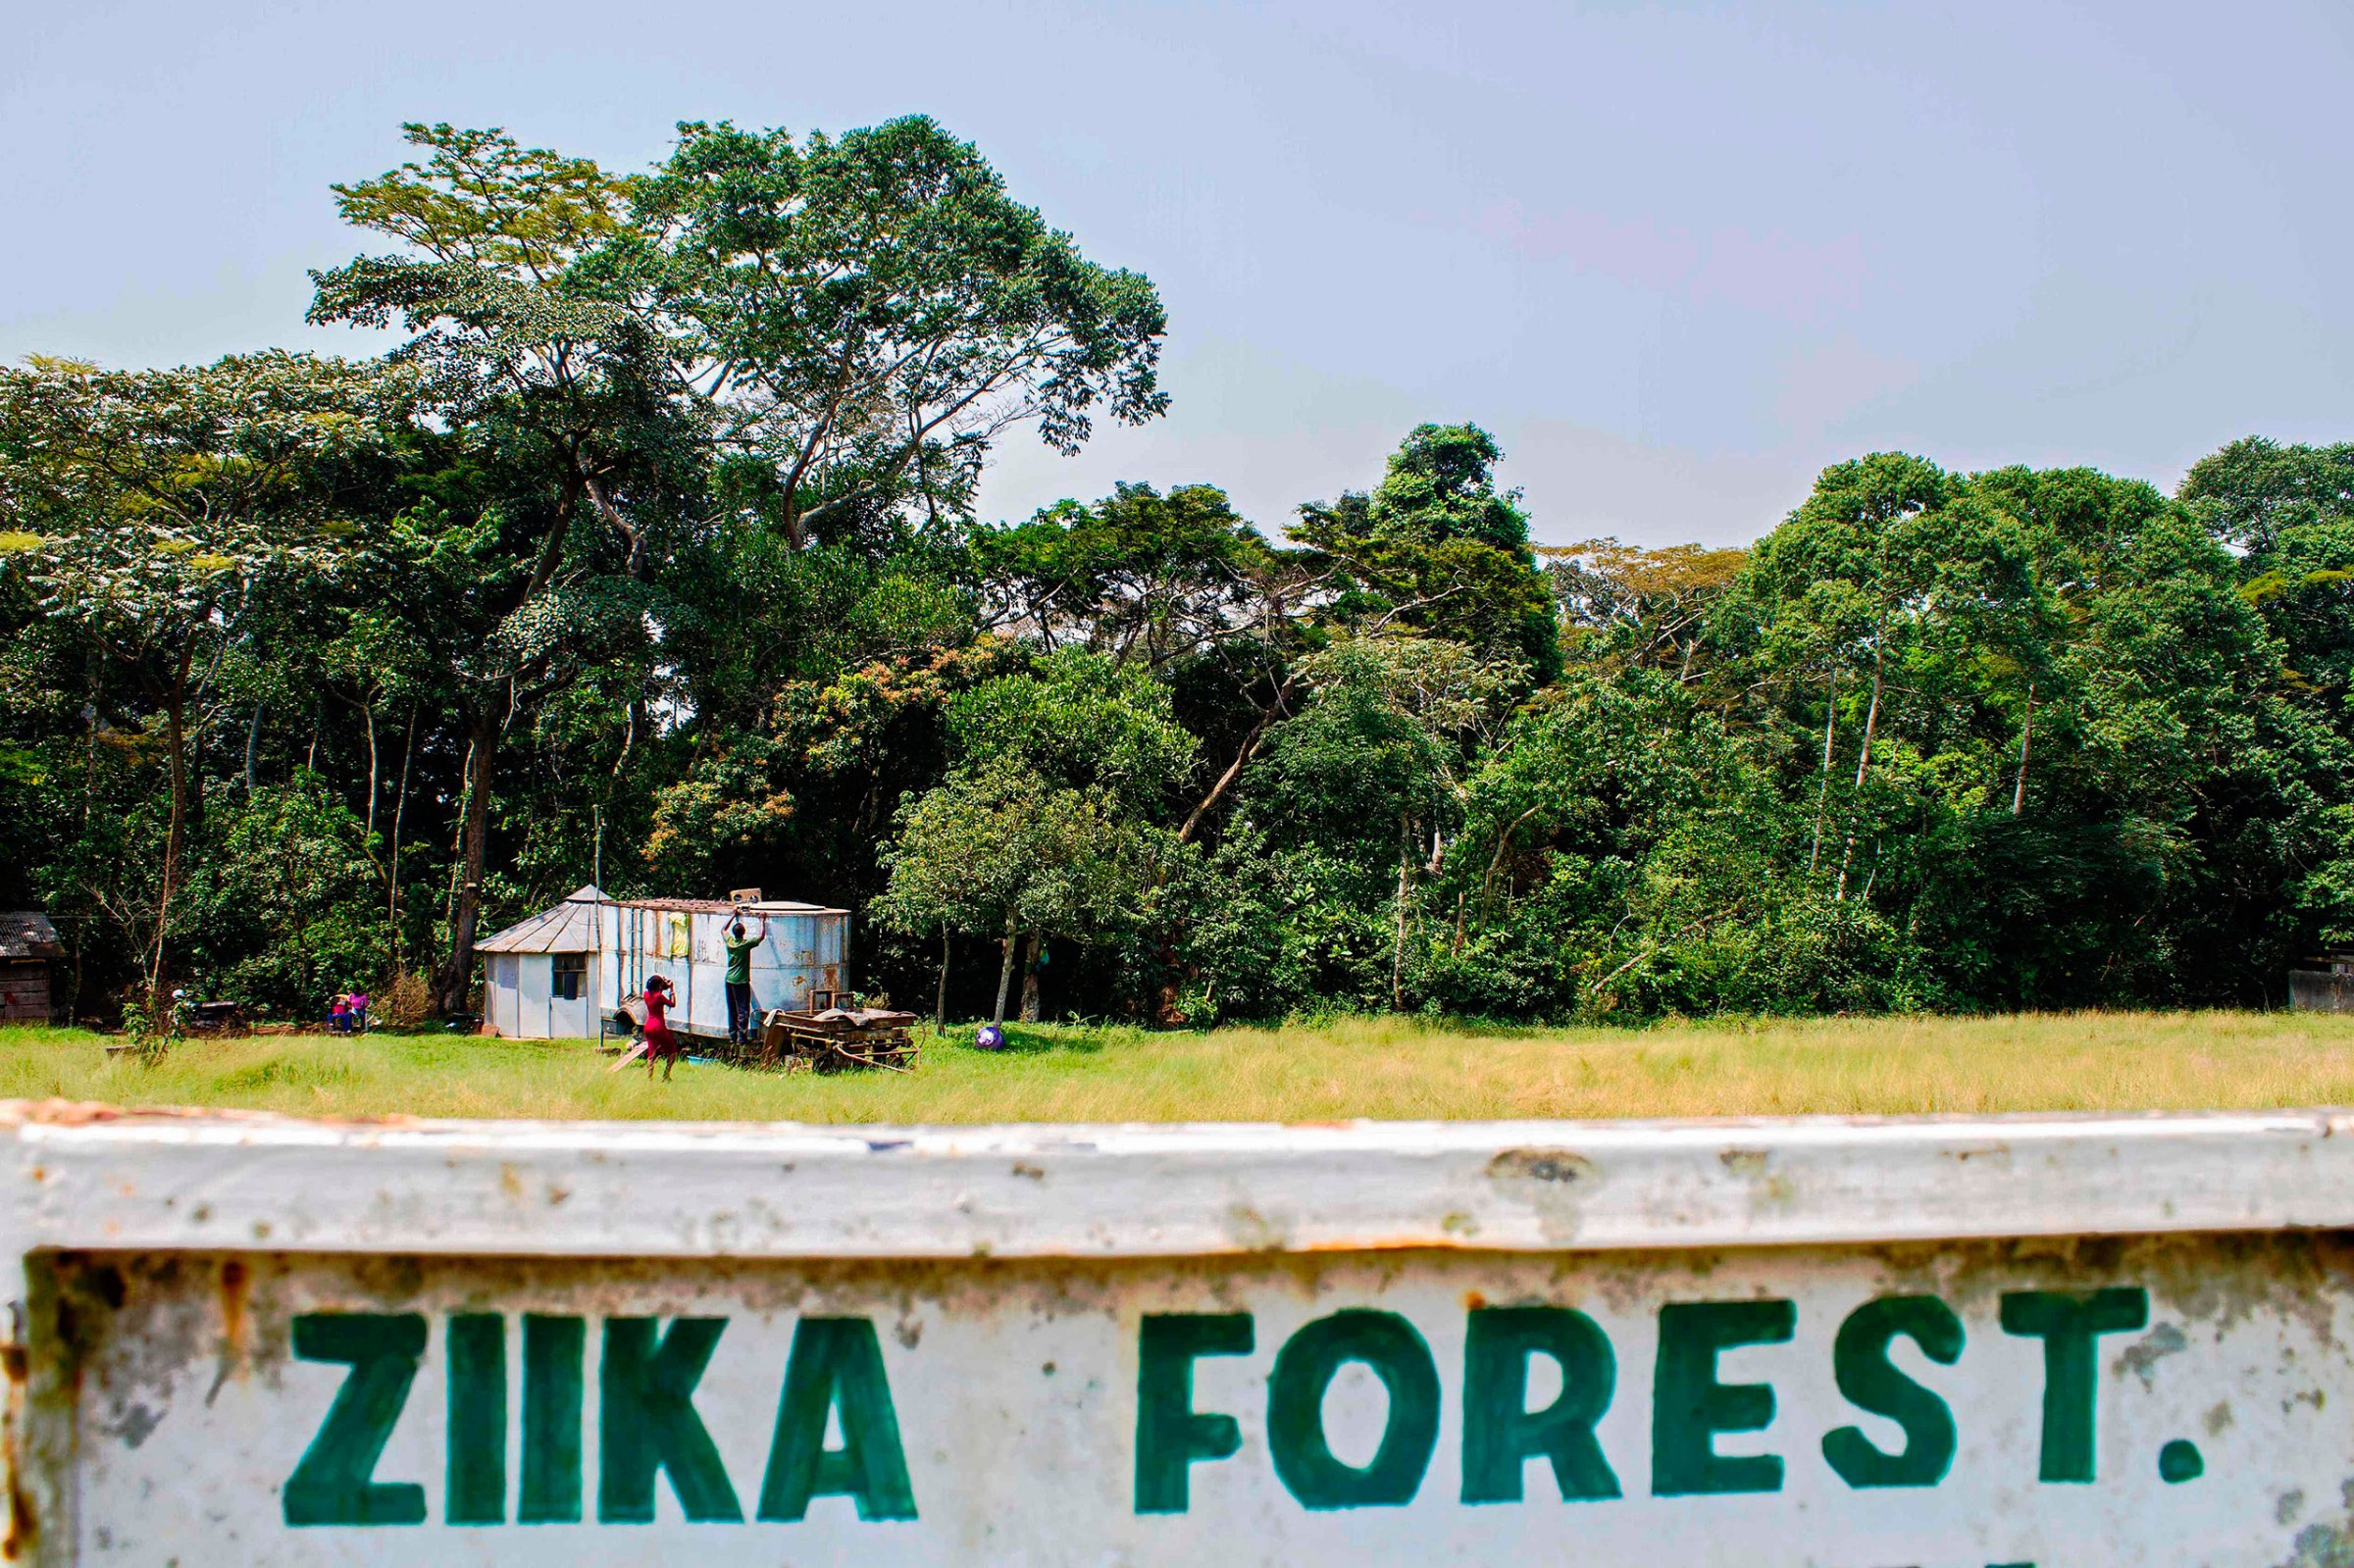 A sign post leading to the Ziika forest is seen near Entebbe, Uganda, Jan. 29, 2016. The Zika virus was first discovered here by scientists in April 1947 after testing a macaque monkey.